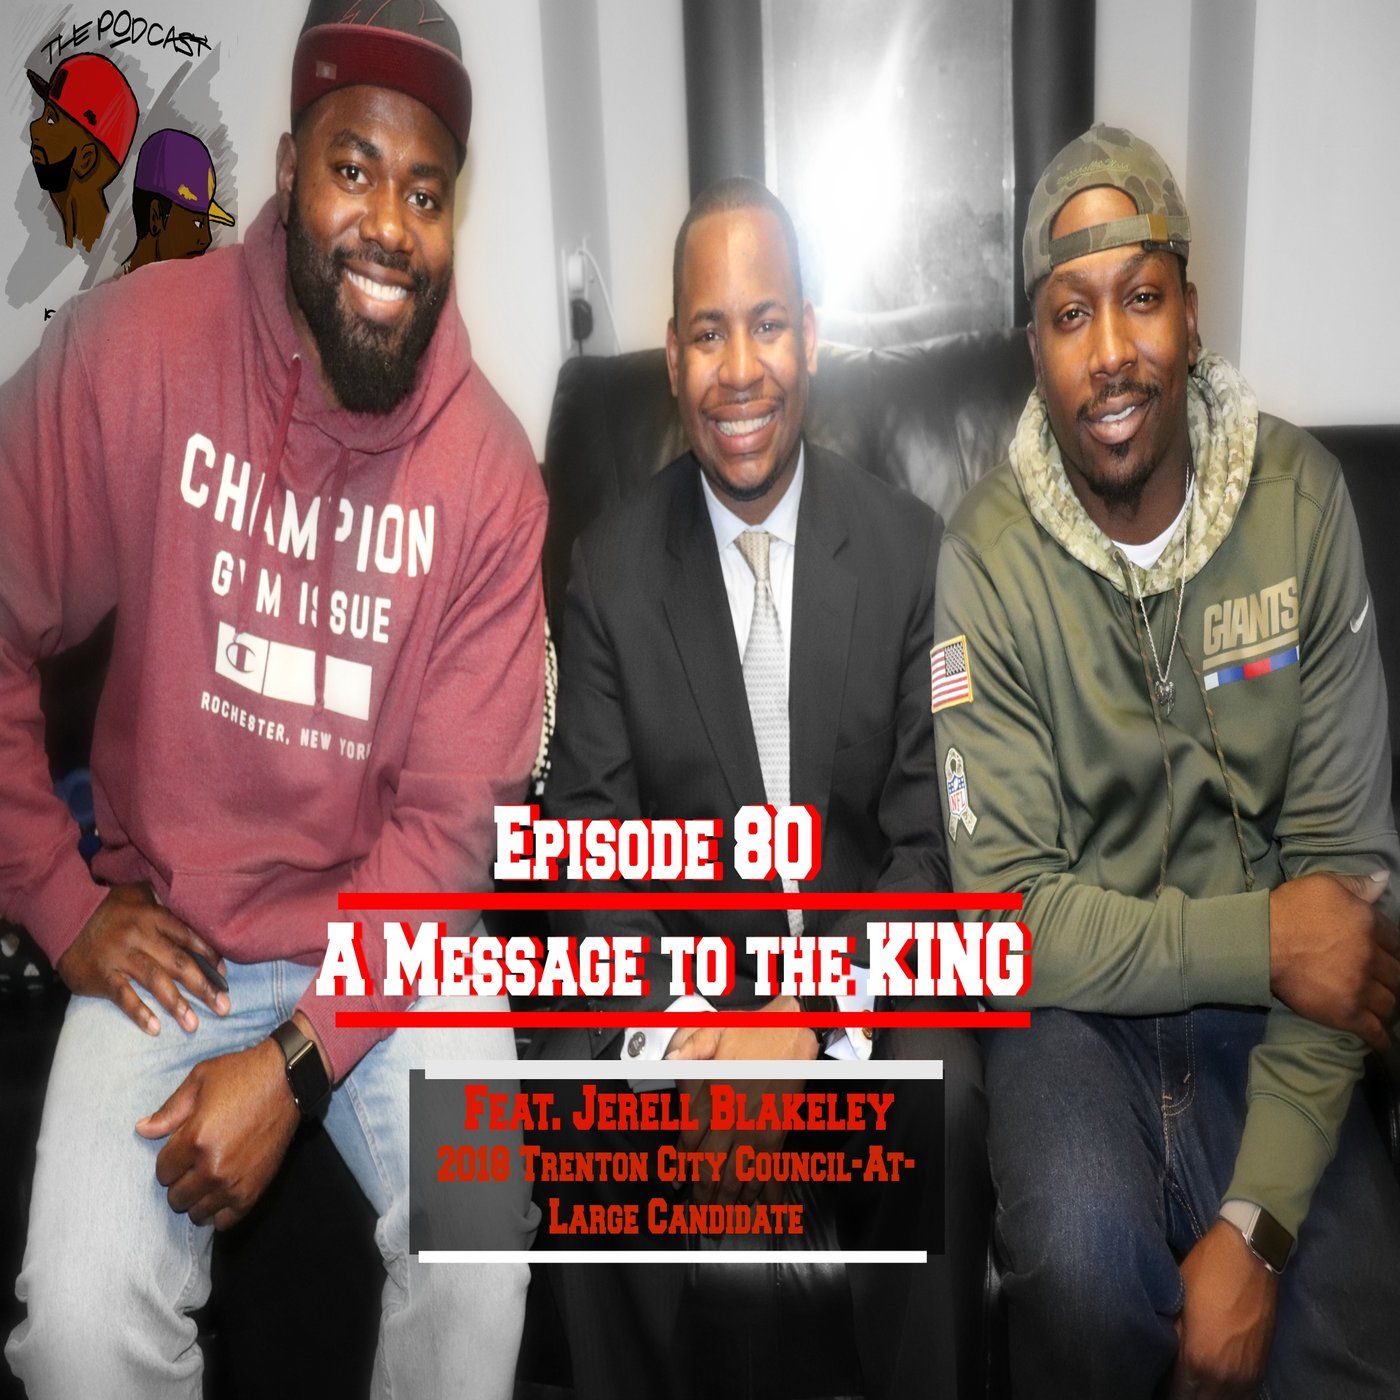 Episode 80 - A message to the King W/ Jerell Blakeley